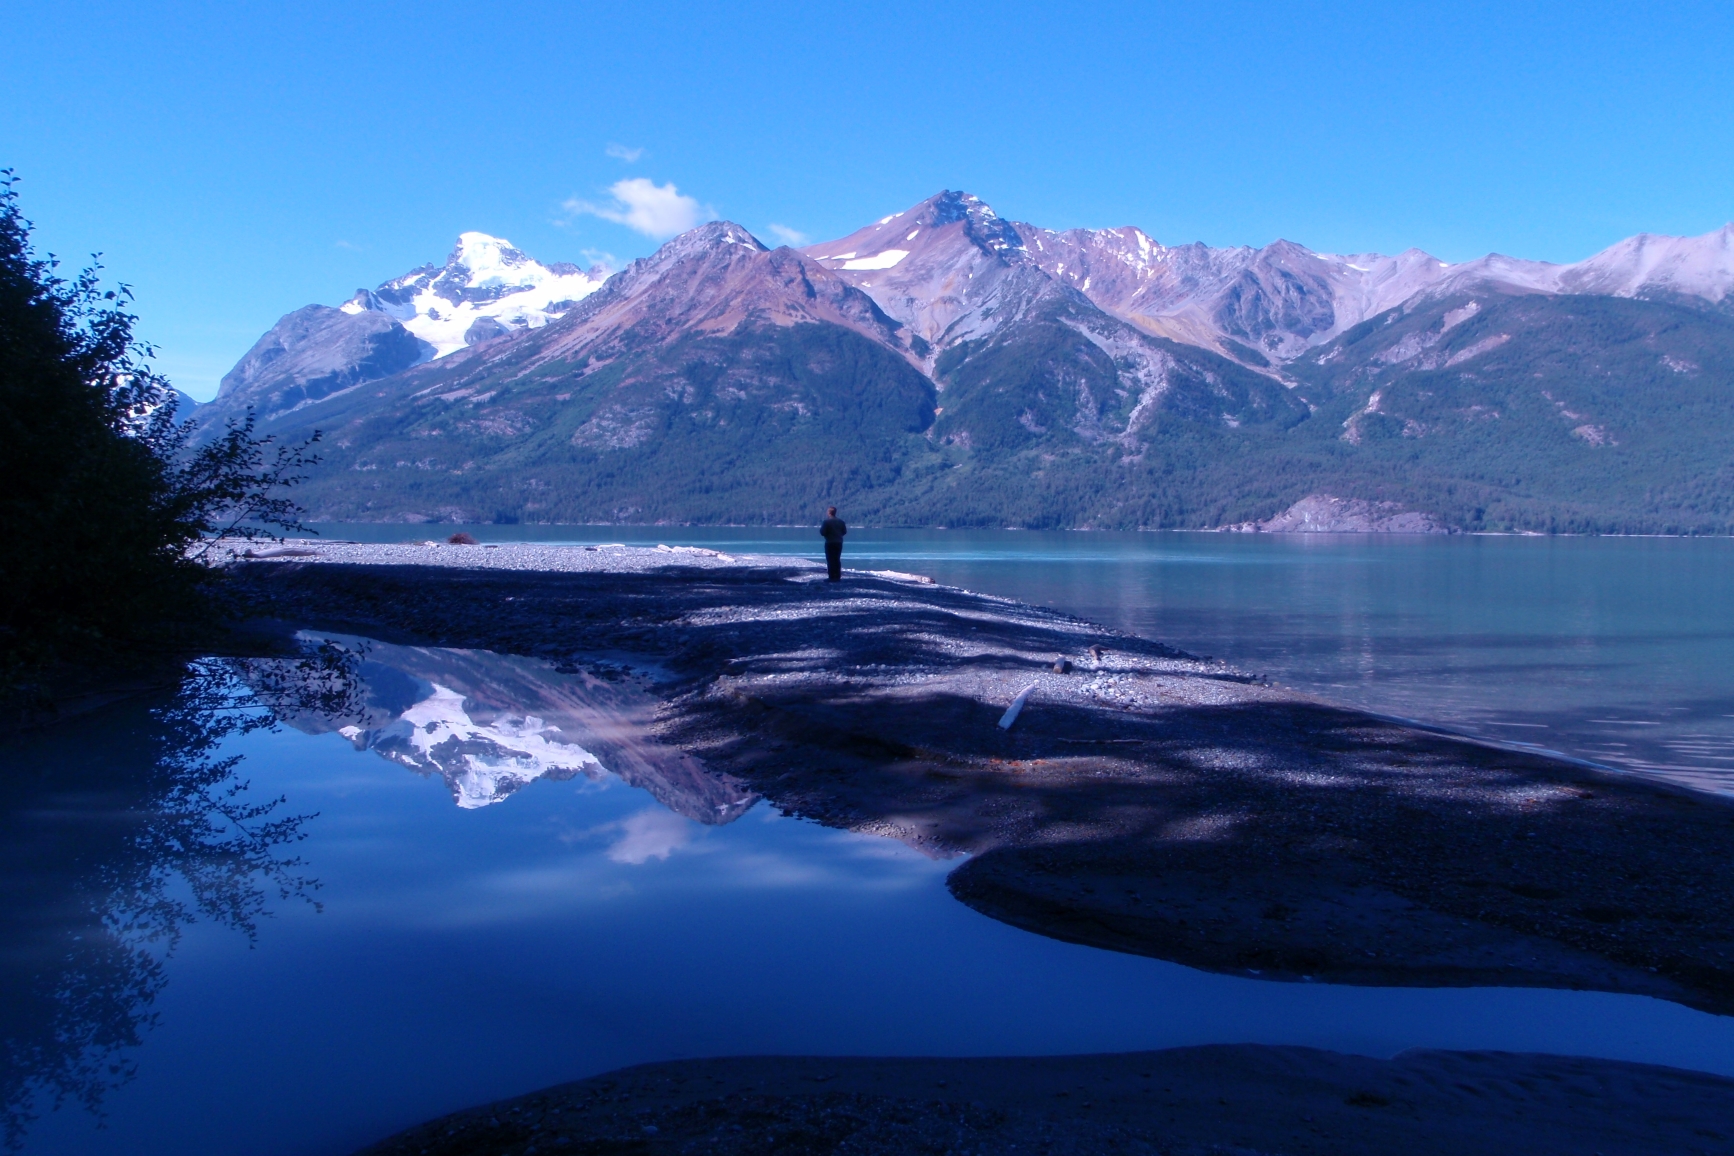 A camp visitor walking along the shoreline with mountains in the background